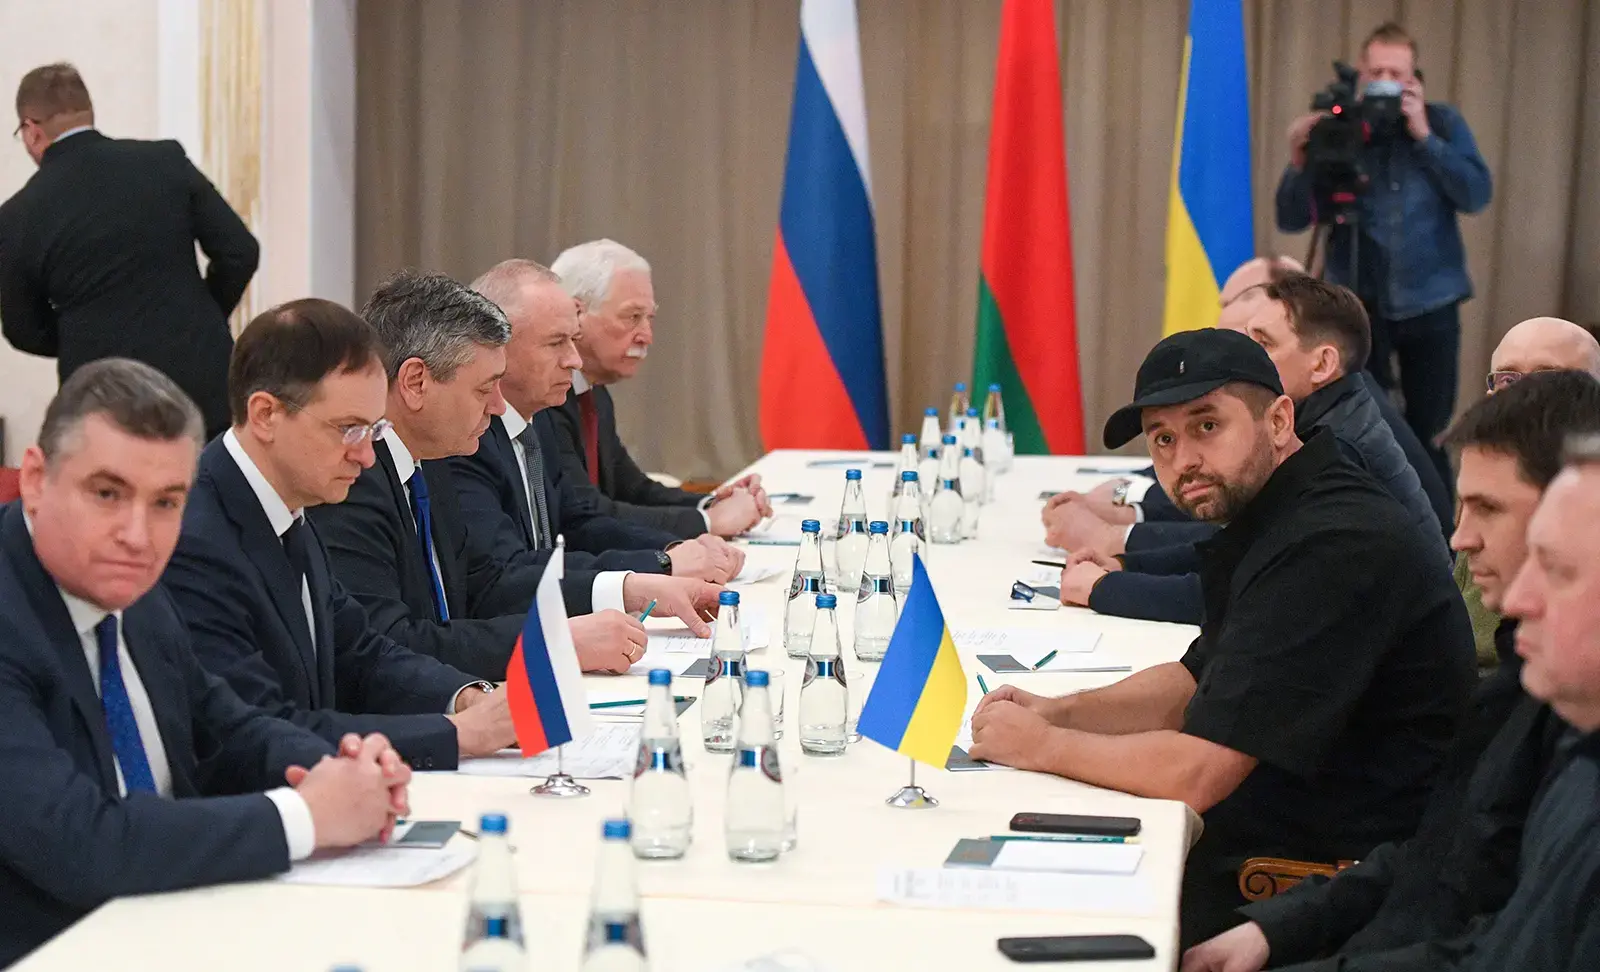 More than 160 delegations, excluding Russia invited to Ukraine peace talks